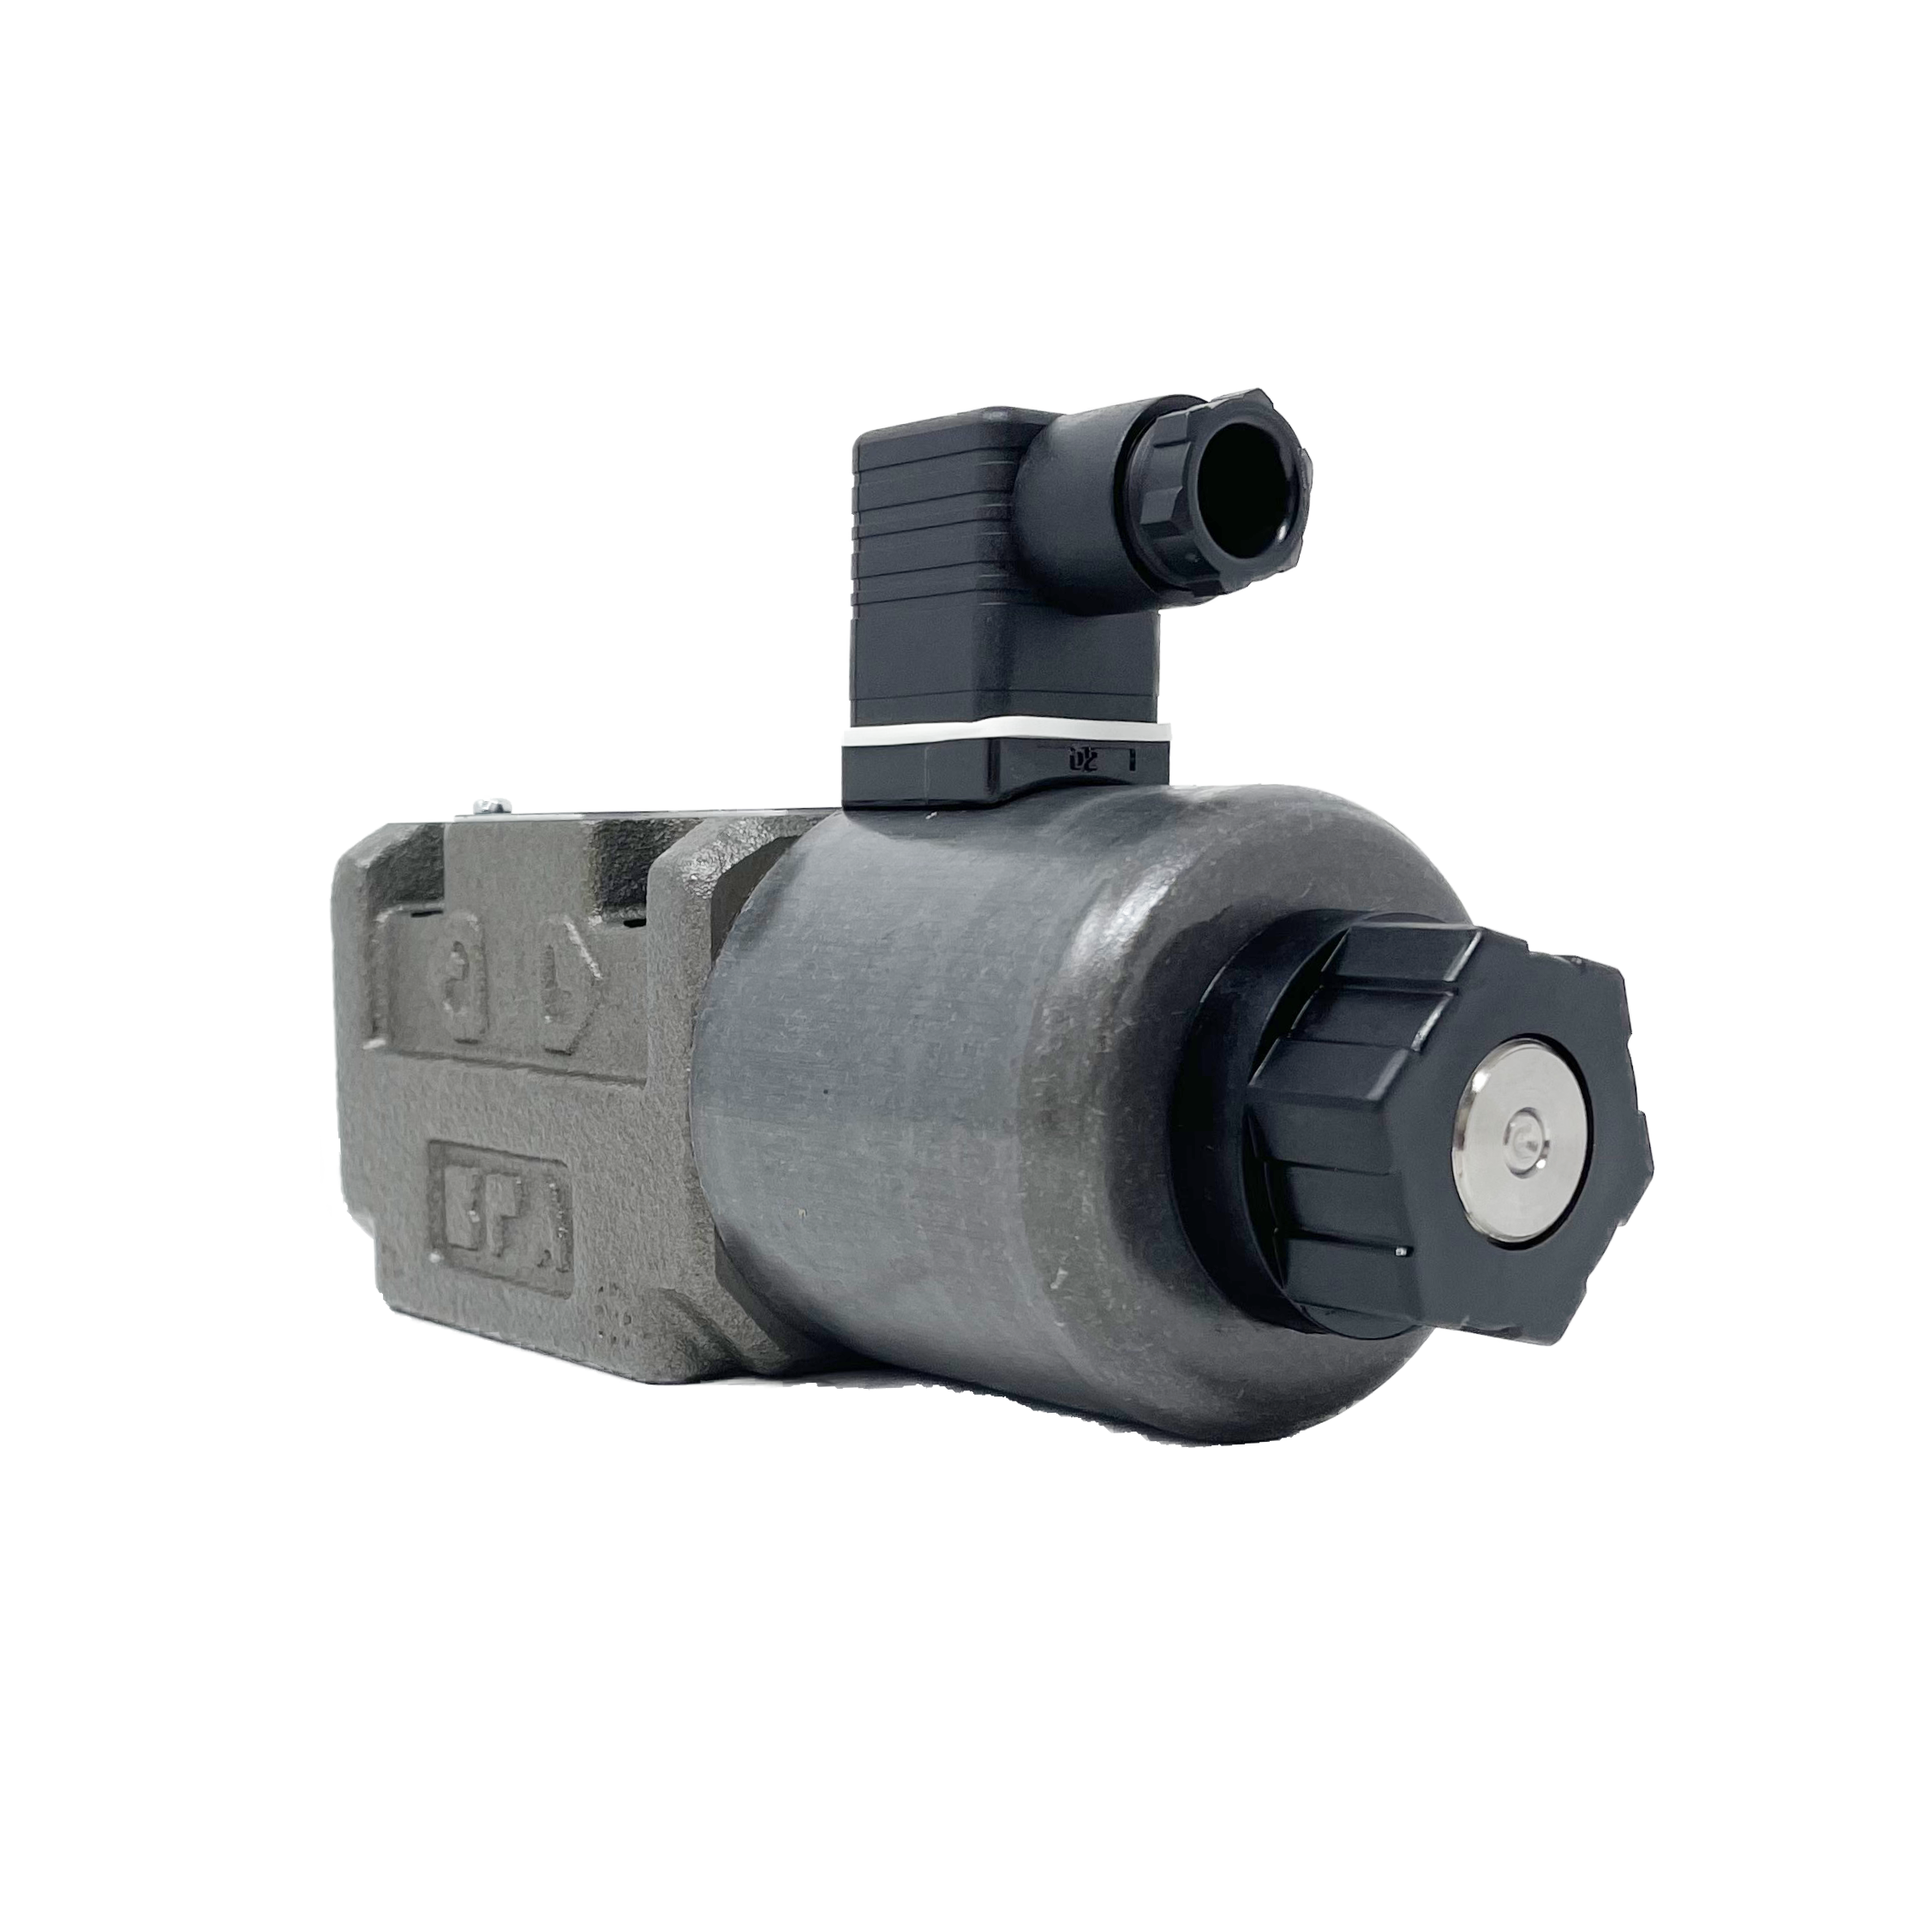 SA-G03-A3Z-C115-E21 : Nachi Solenoid Valve, 3P4W, D05 (NG10), 34.3GPM, 5075psi, P to A, B to T in Neutral, 110 VAC, DIN